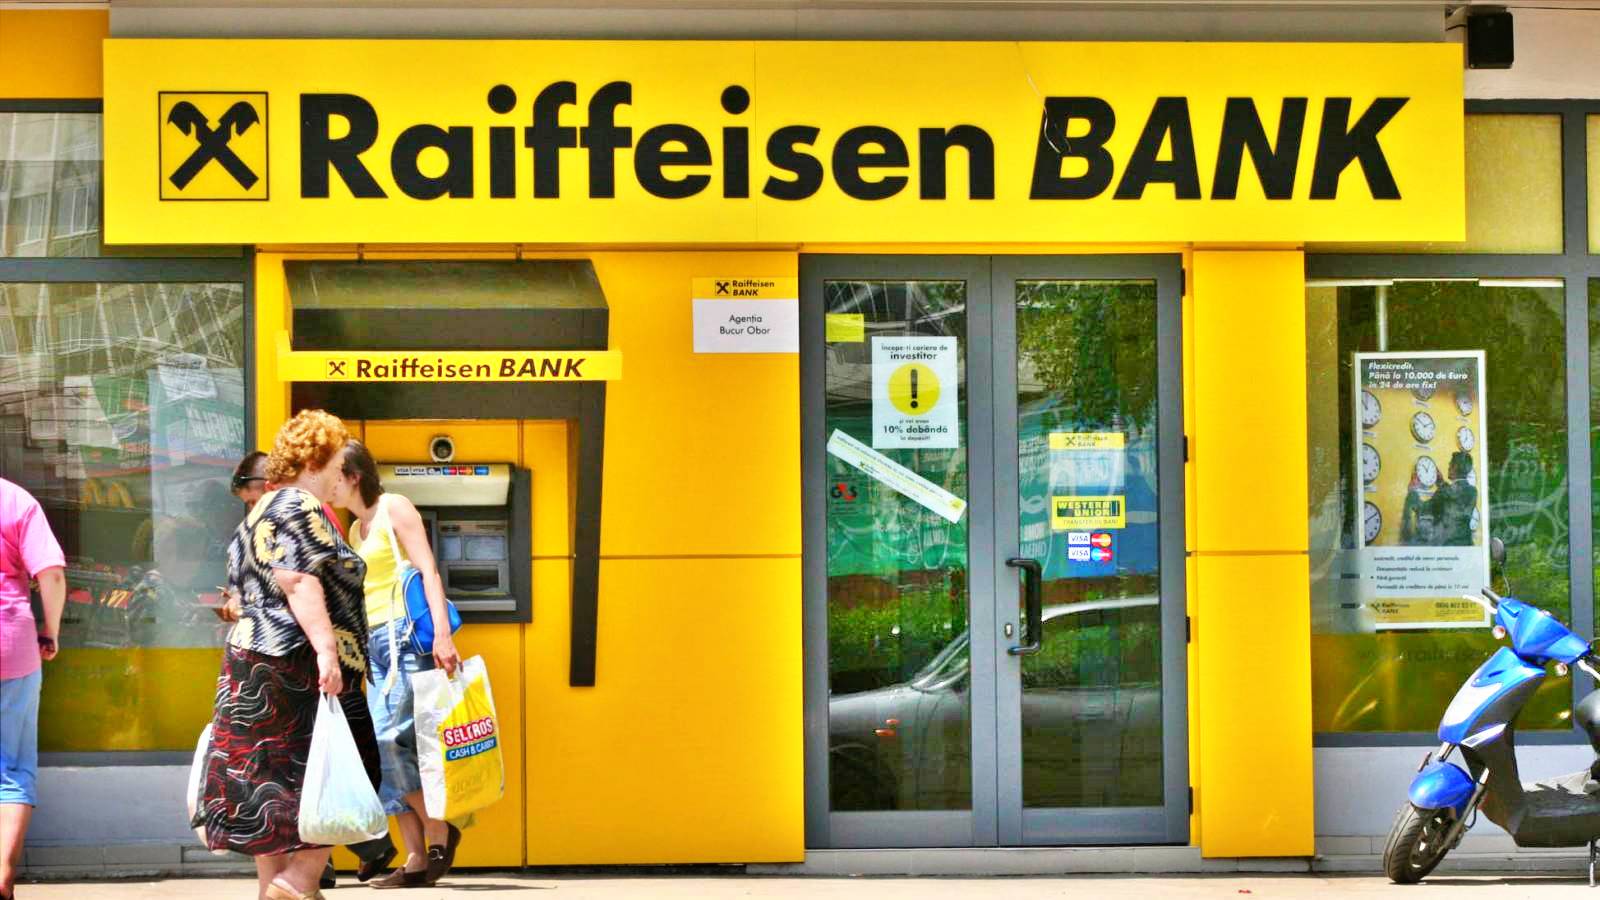 Raiffeisen Bank Official Decisions LAST MINUTE Measures Affecting Romanian Customers